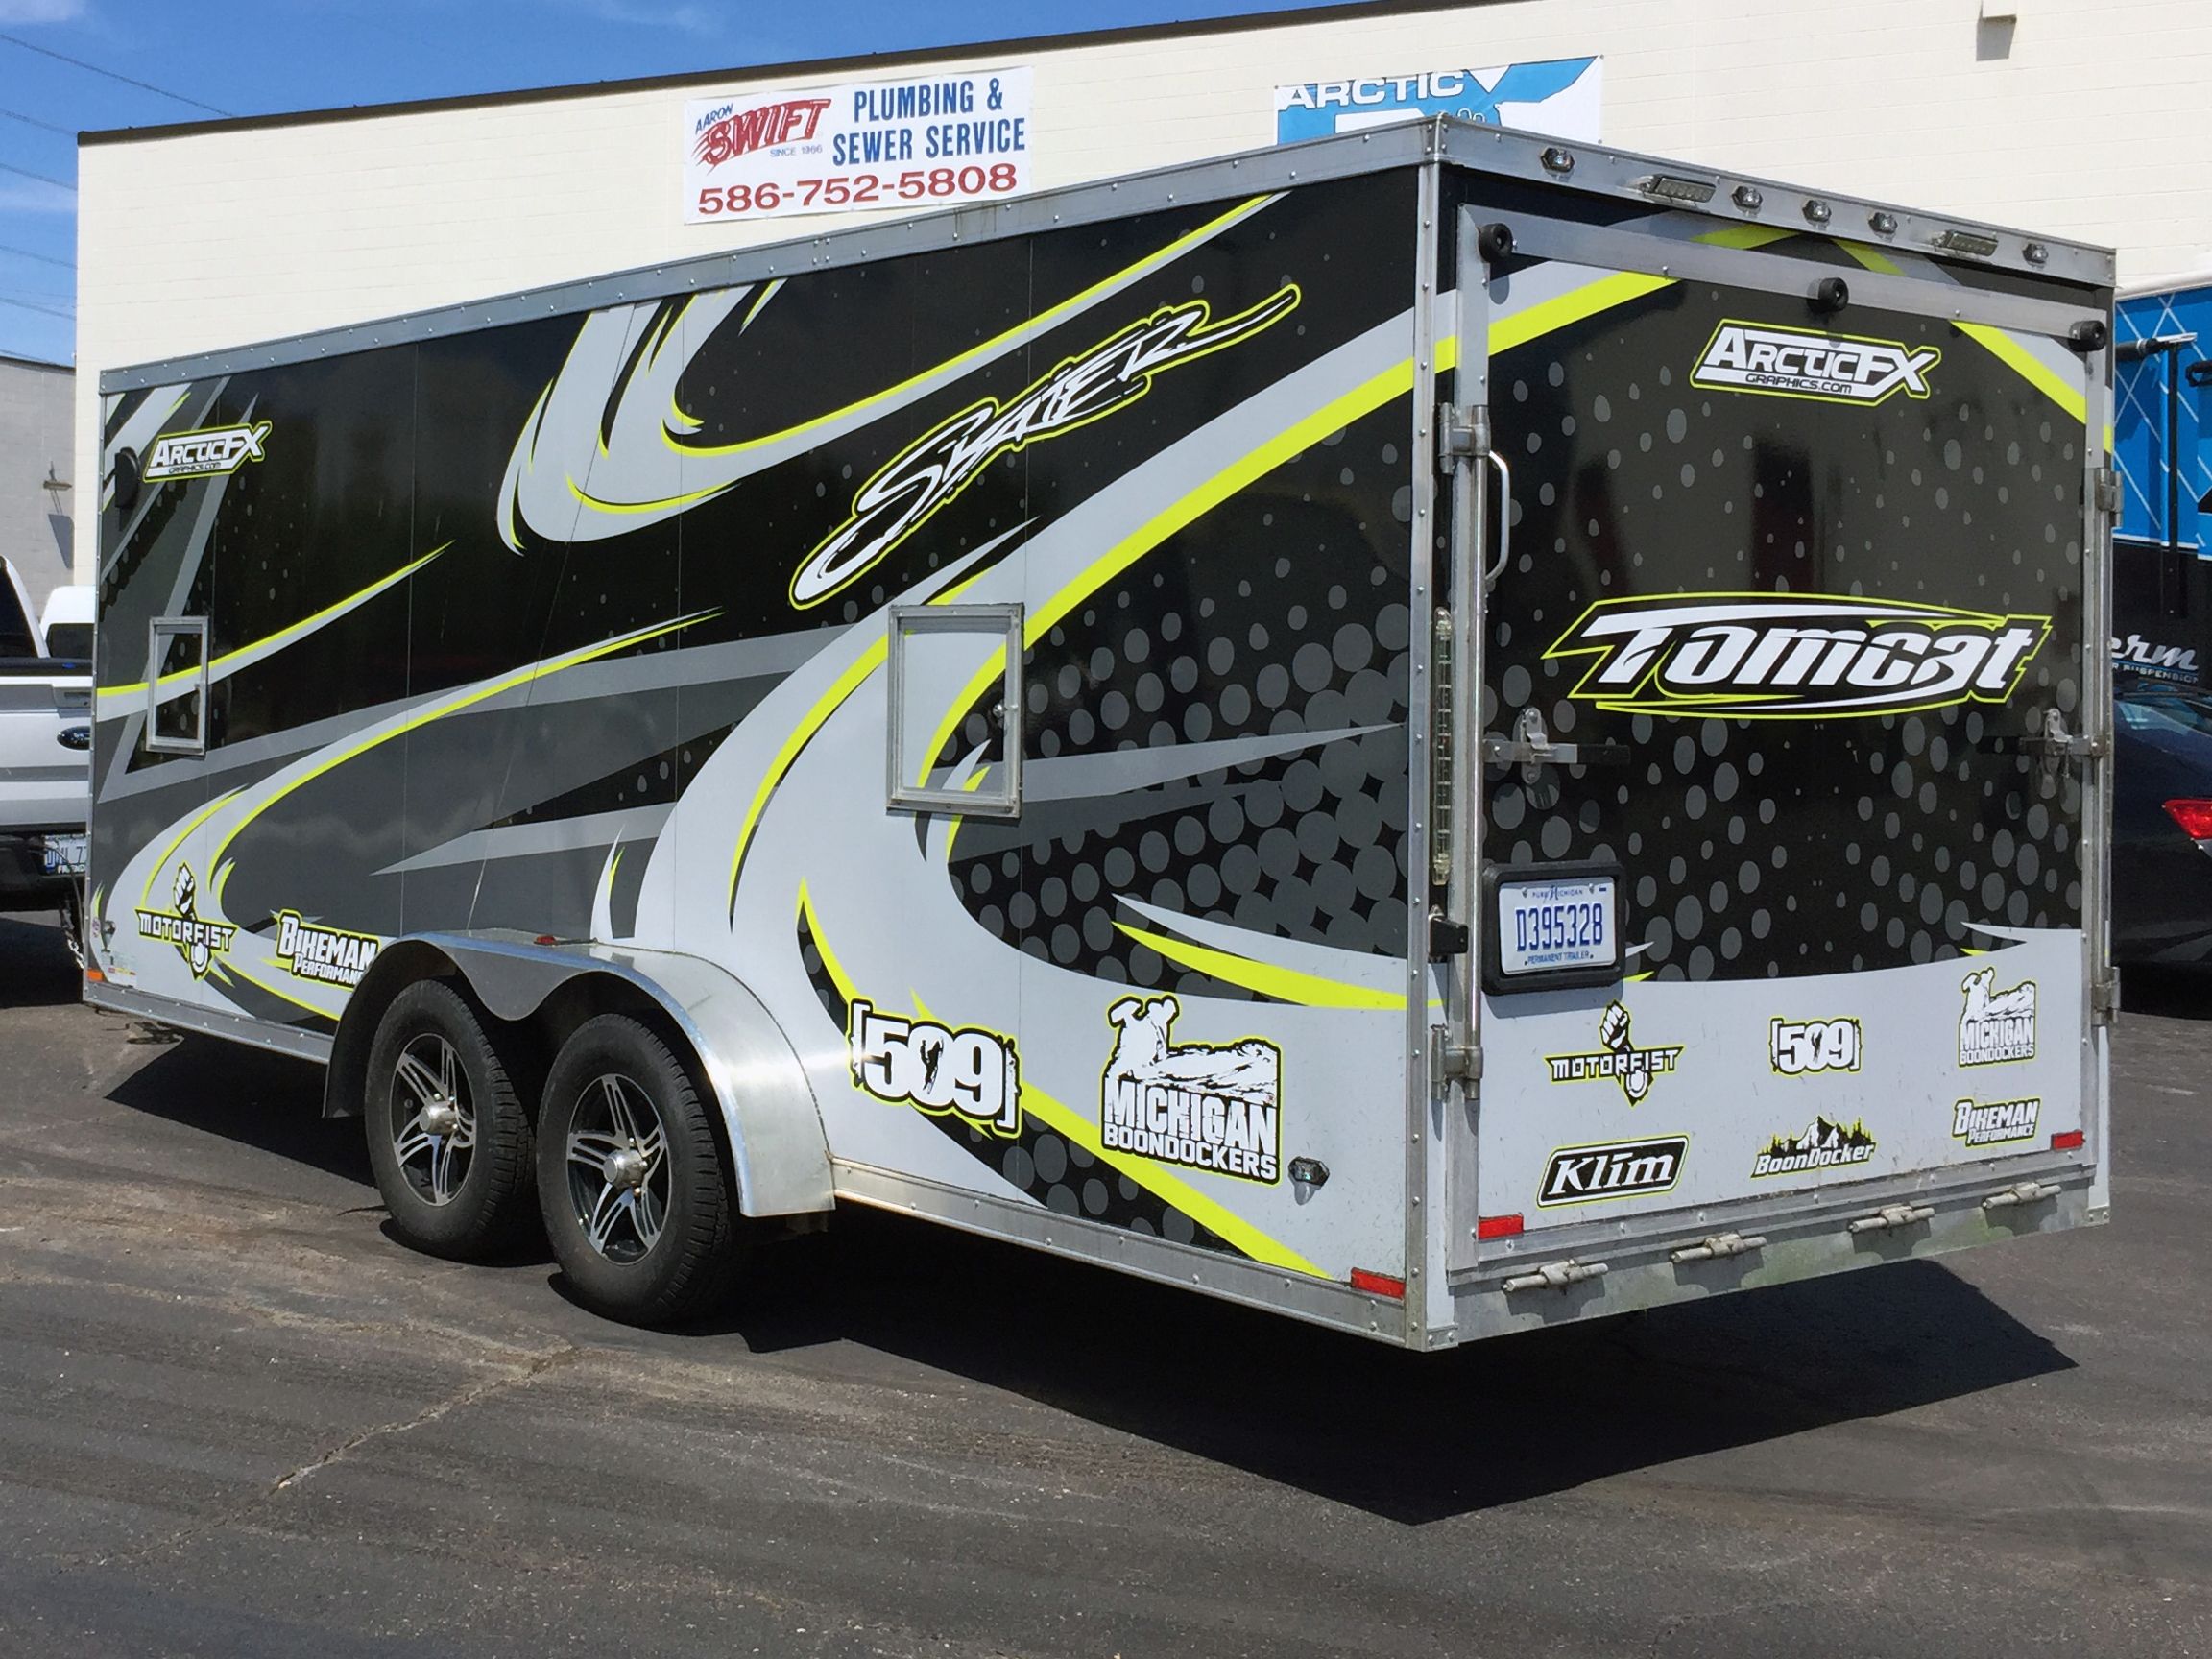 A snowmobile trailer with a custom decorative tribal vinyl wrap with lime, gray and black lines and swirls.